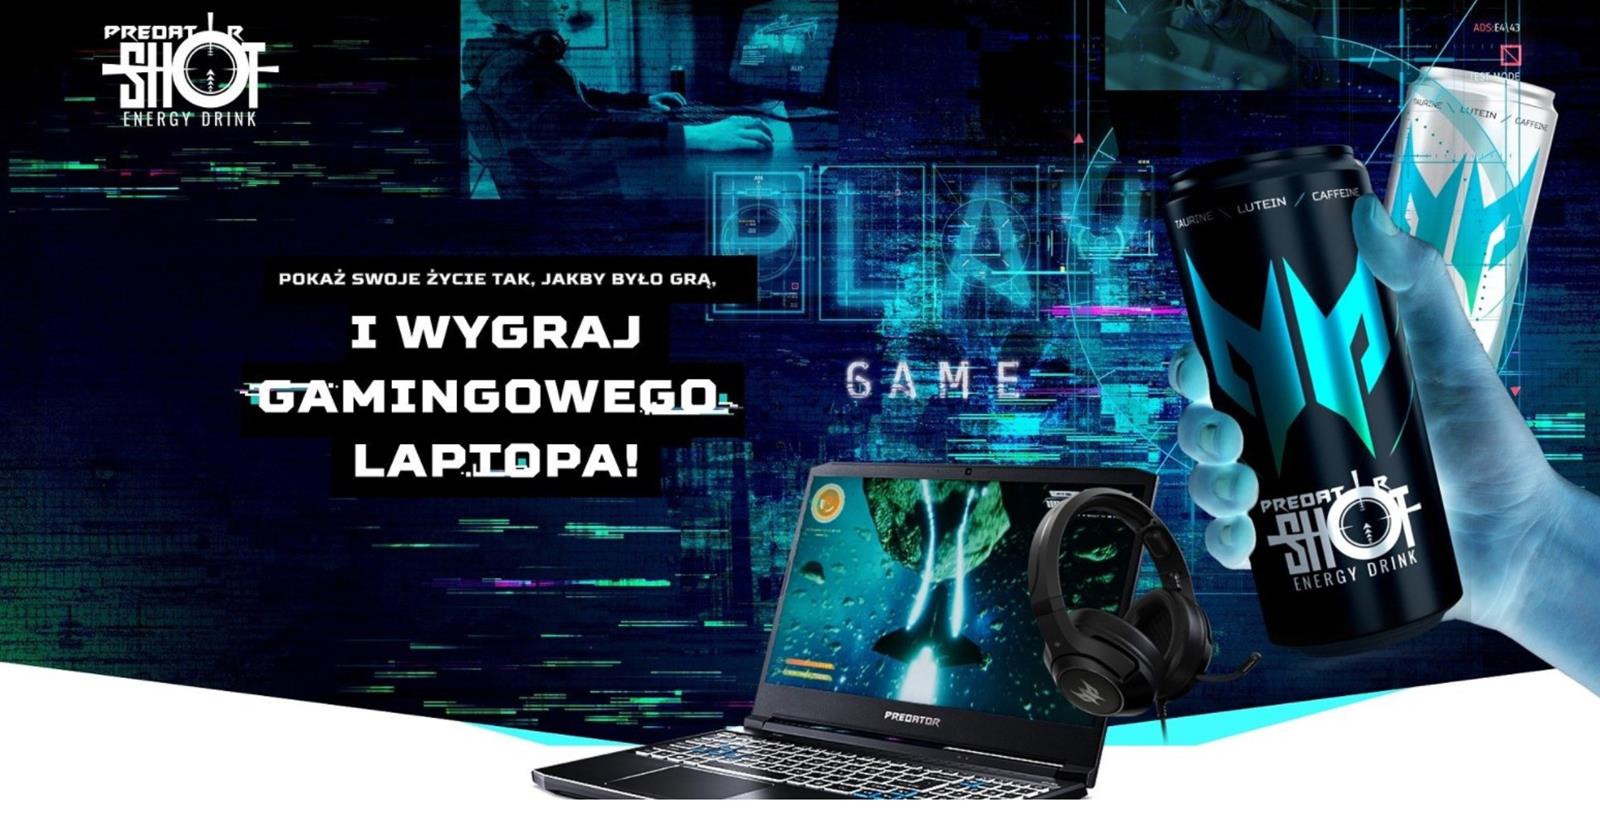 Are you looking for a new computer?  Win it in the Predator contest